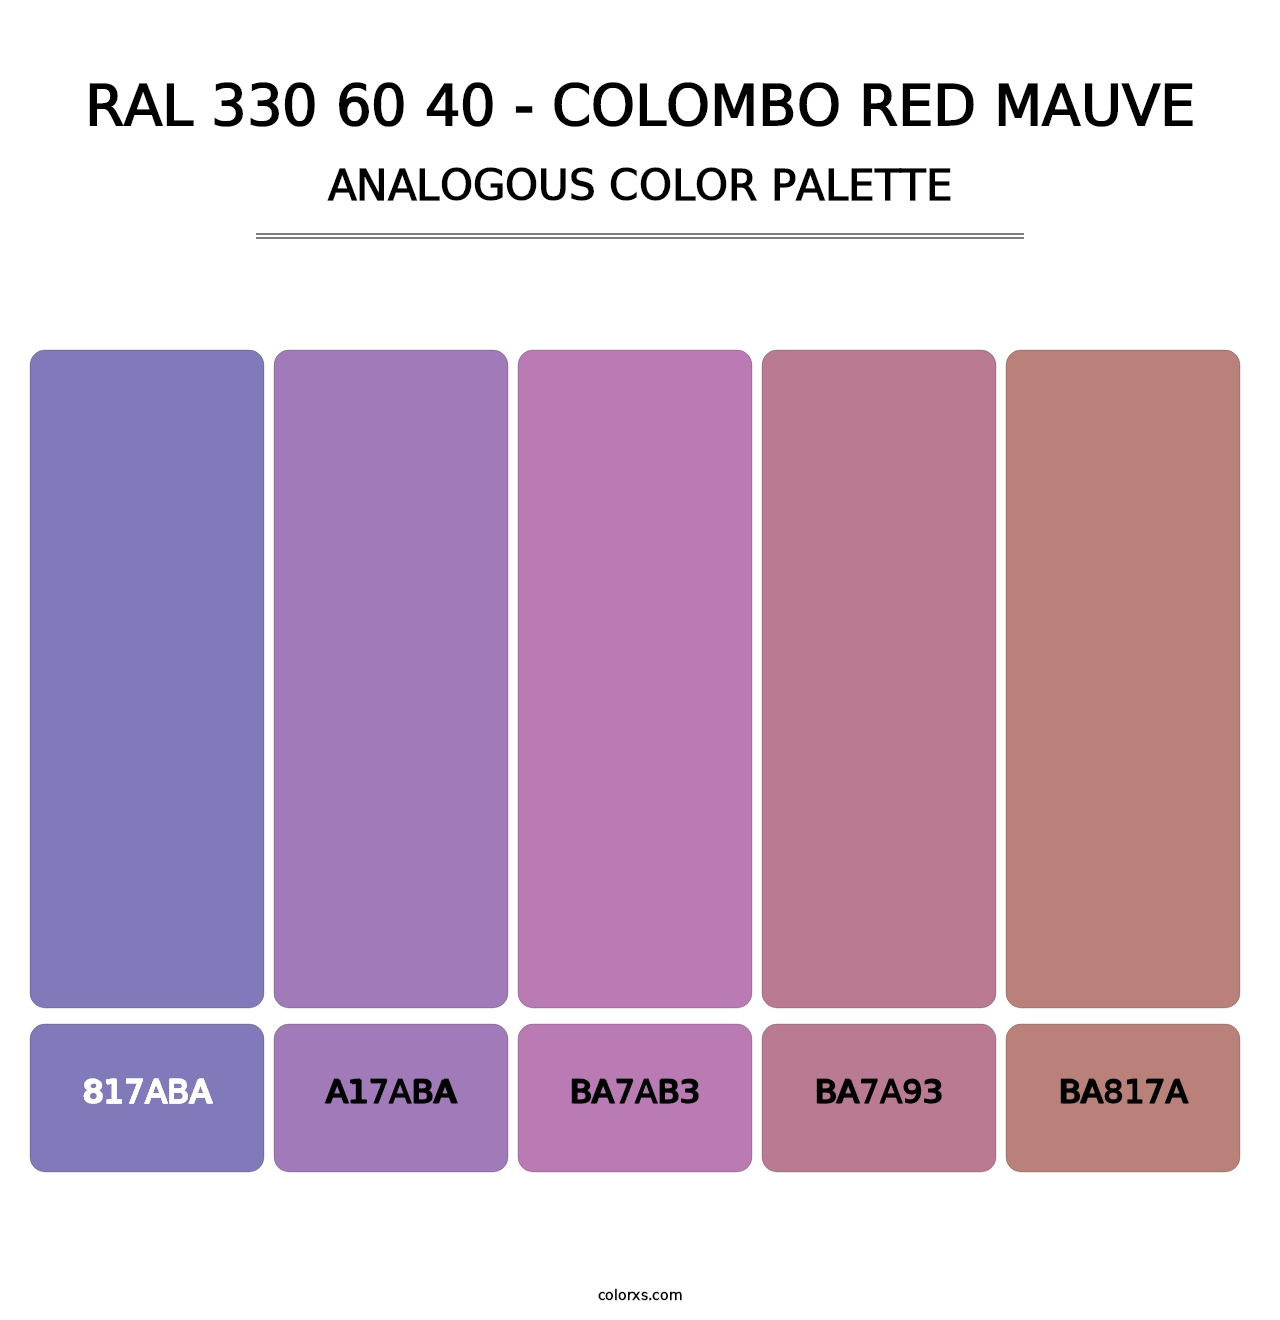 RAL 330 60 40 - Colombo Red Mauve - Analogous Color Palette